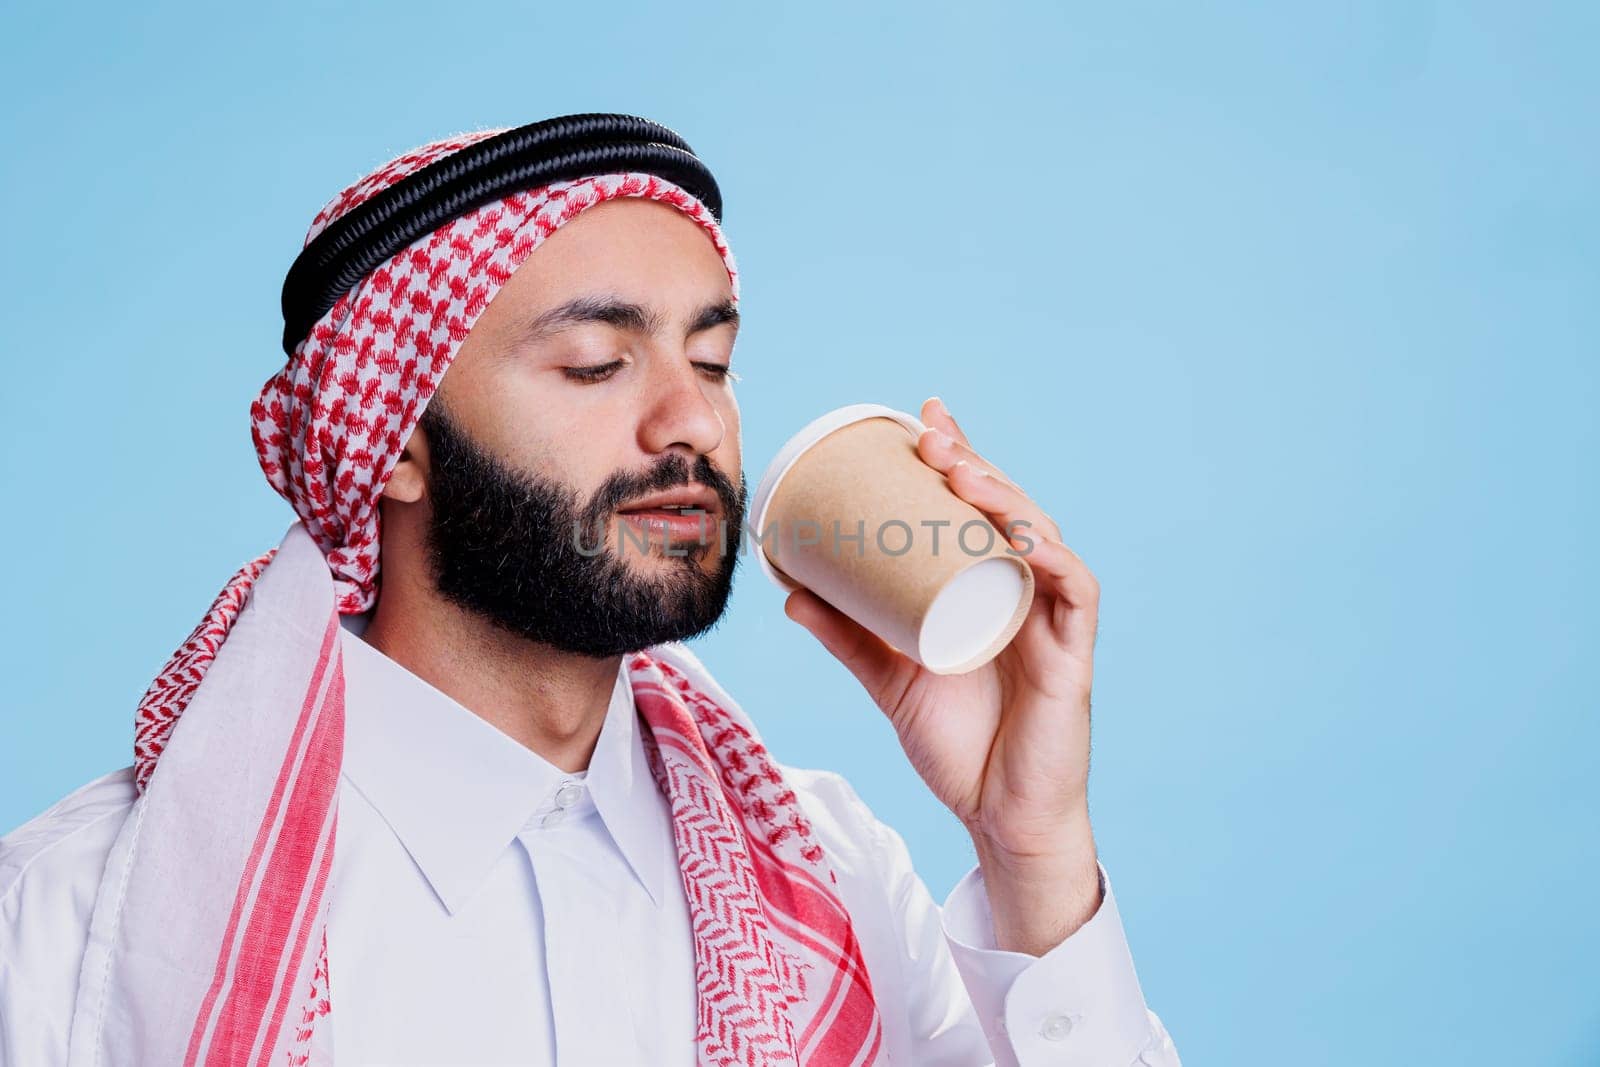 Muslim man wearing traditional islamic clothes drinking coffee to go from paper cup. Arab person dressed in thobe and headscarf holding mug and enjoying hot takeaway beverage